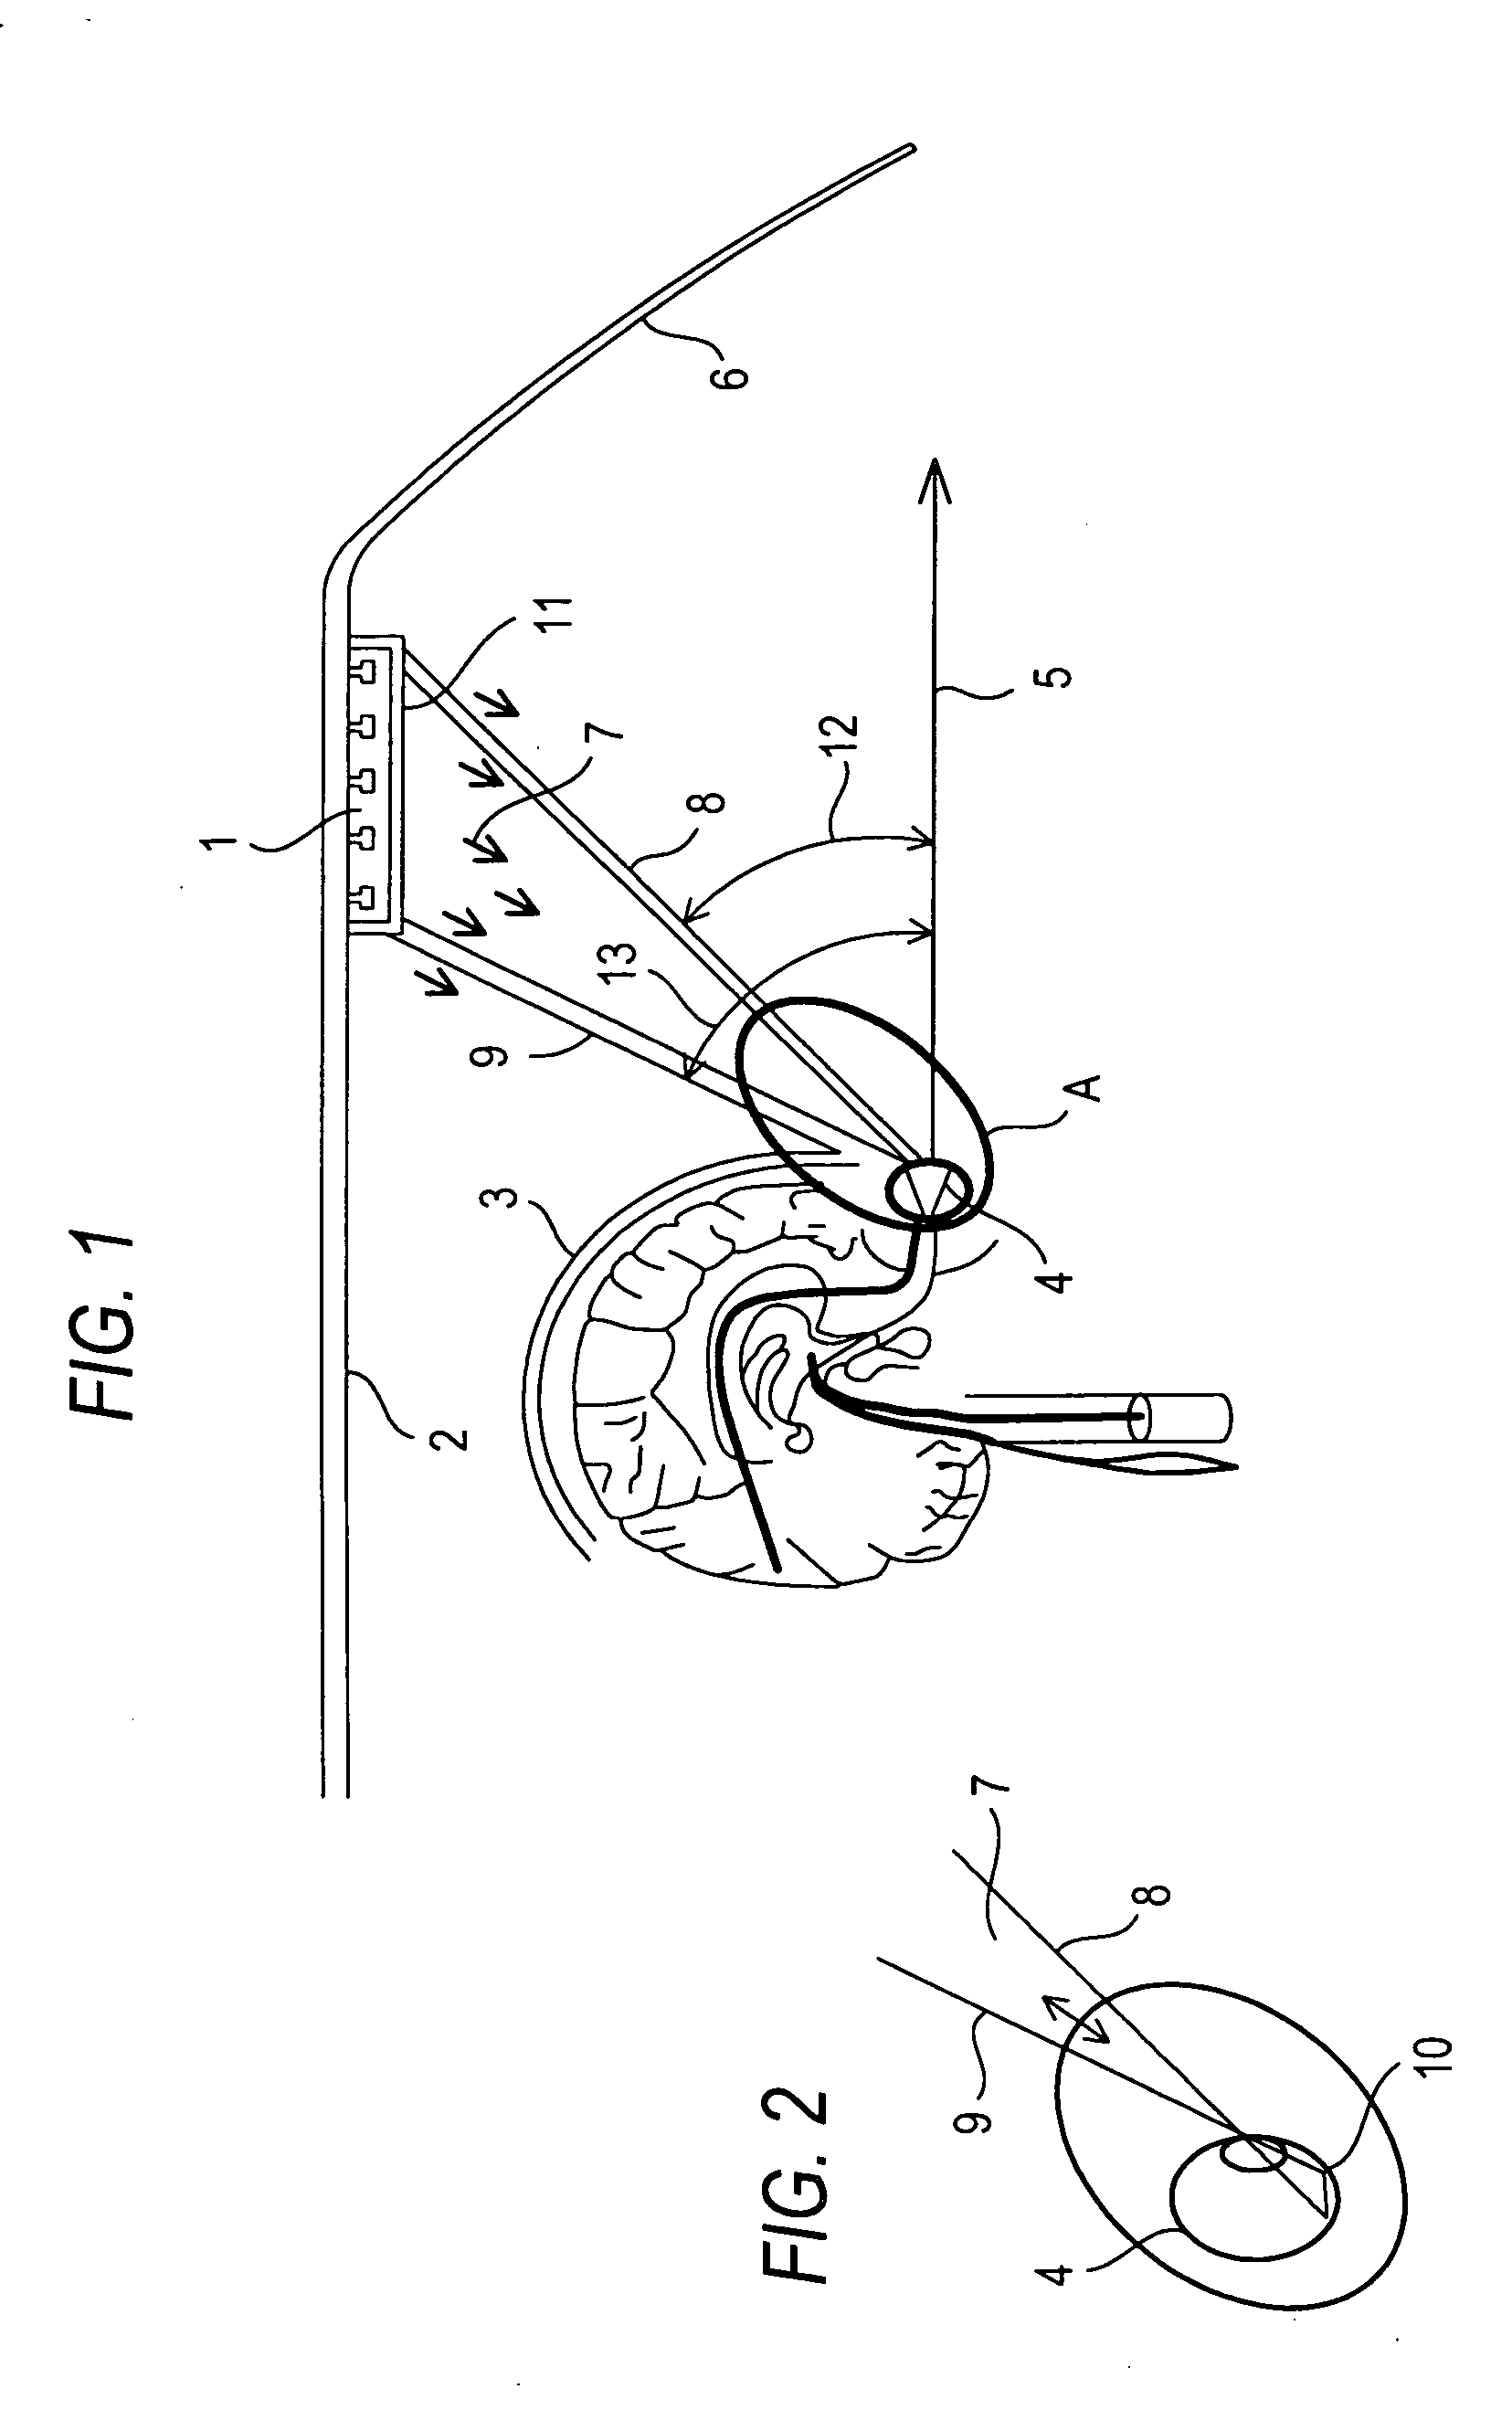 Phototherapy device